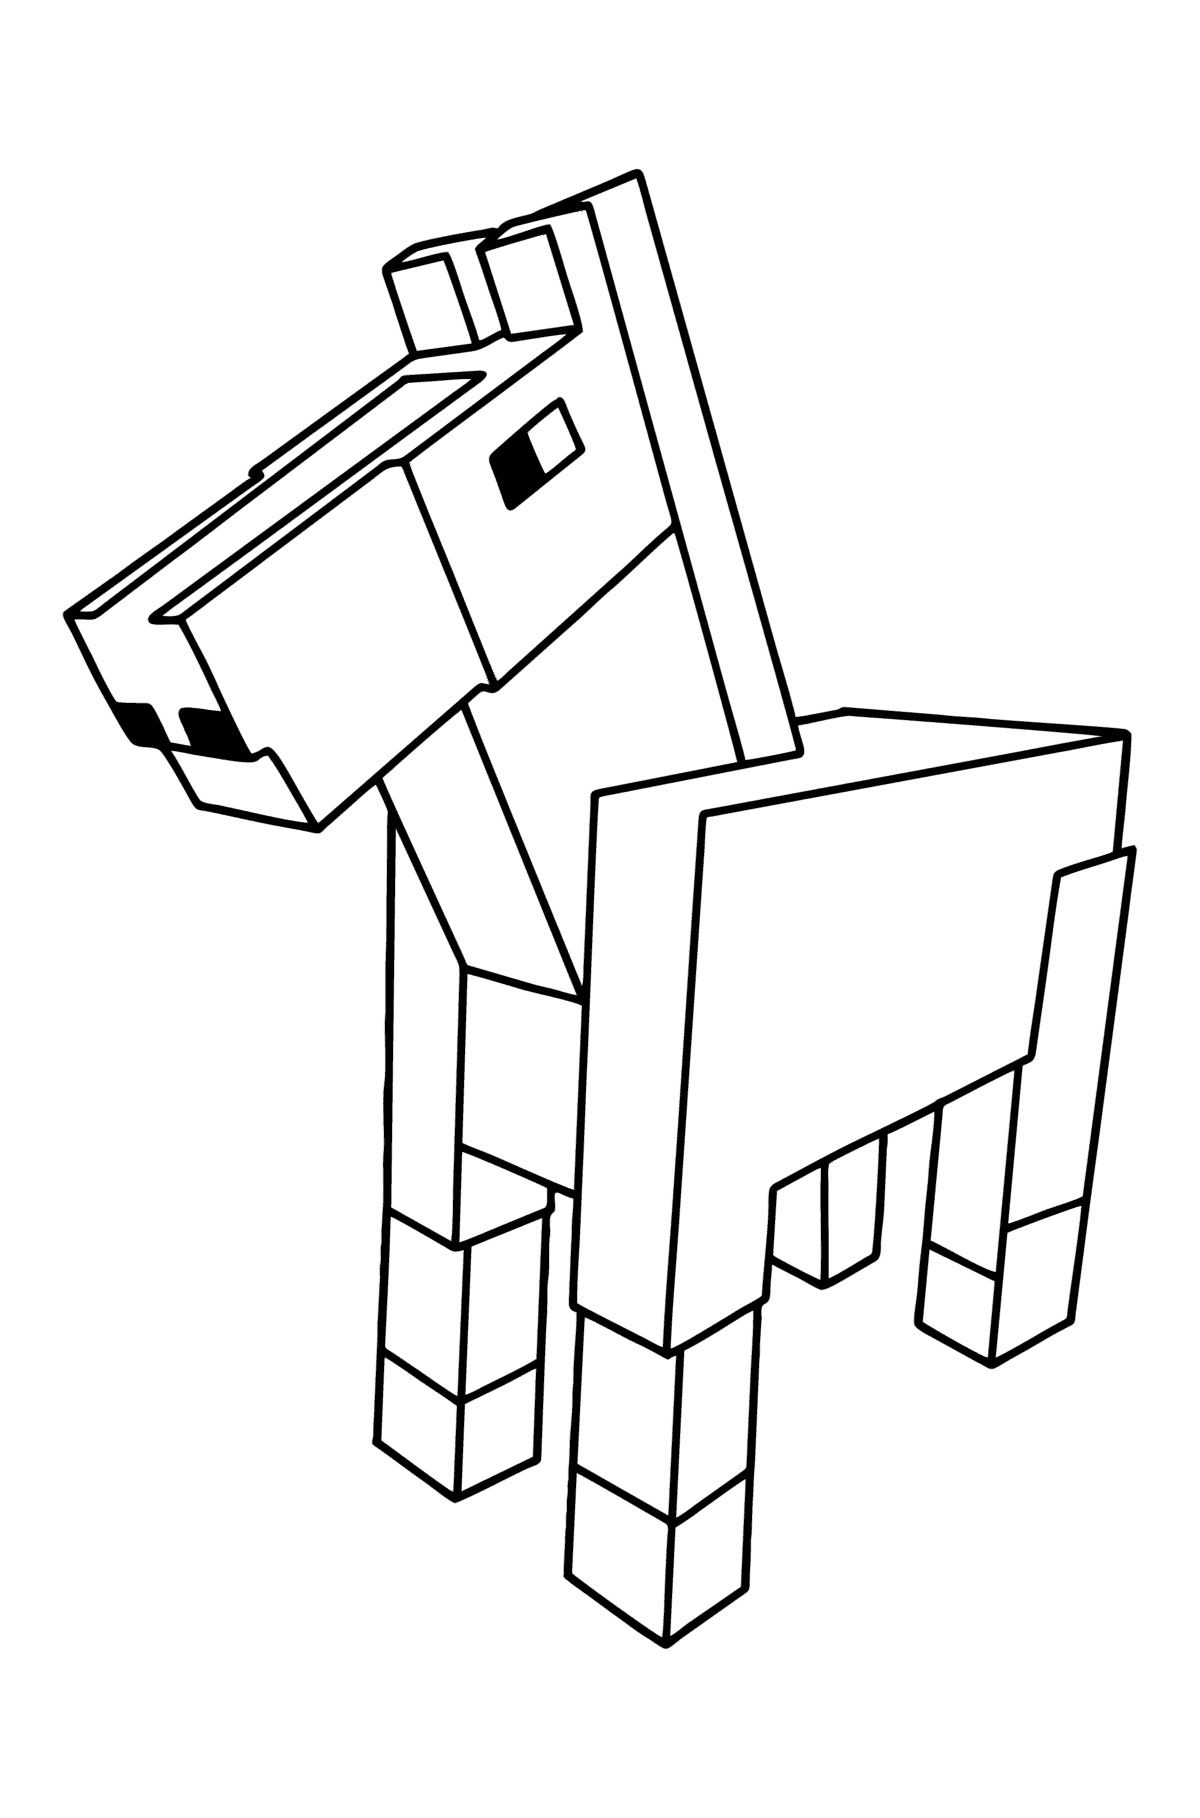 Minecraft Horse coloring page - Coloring Pages for Kids